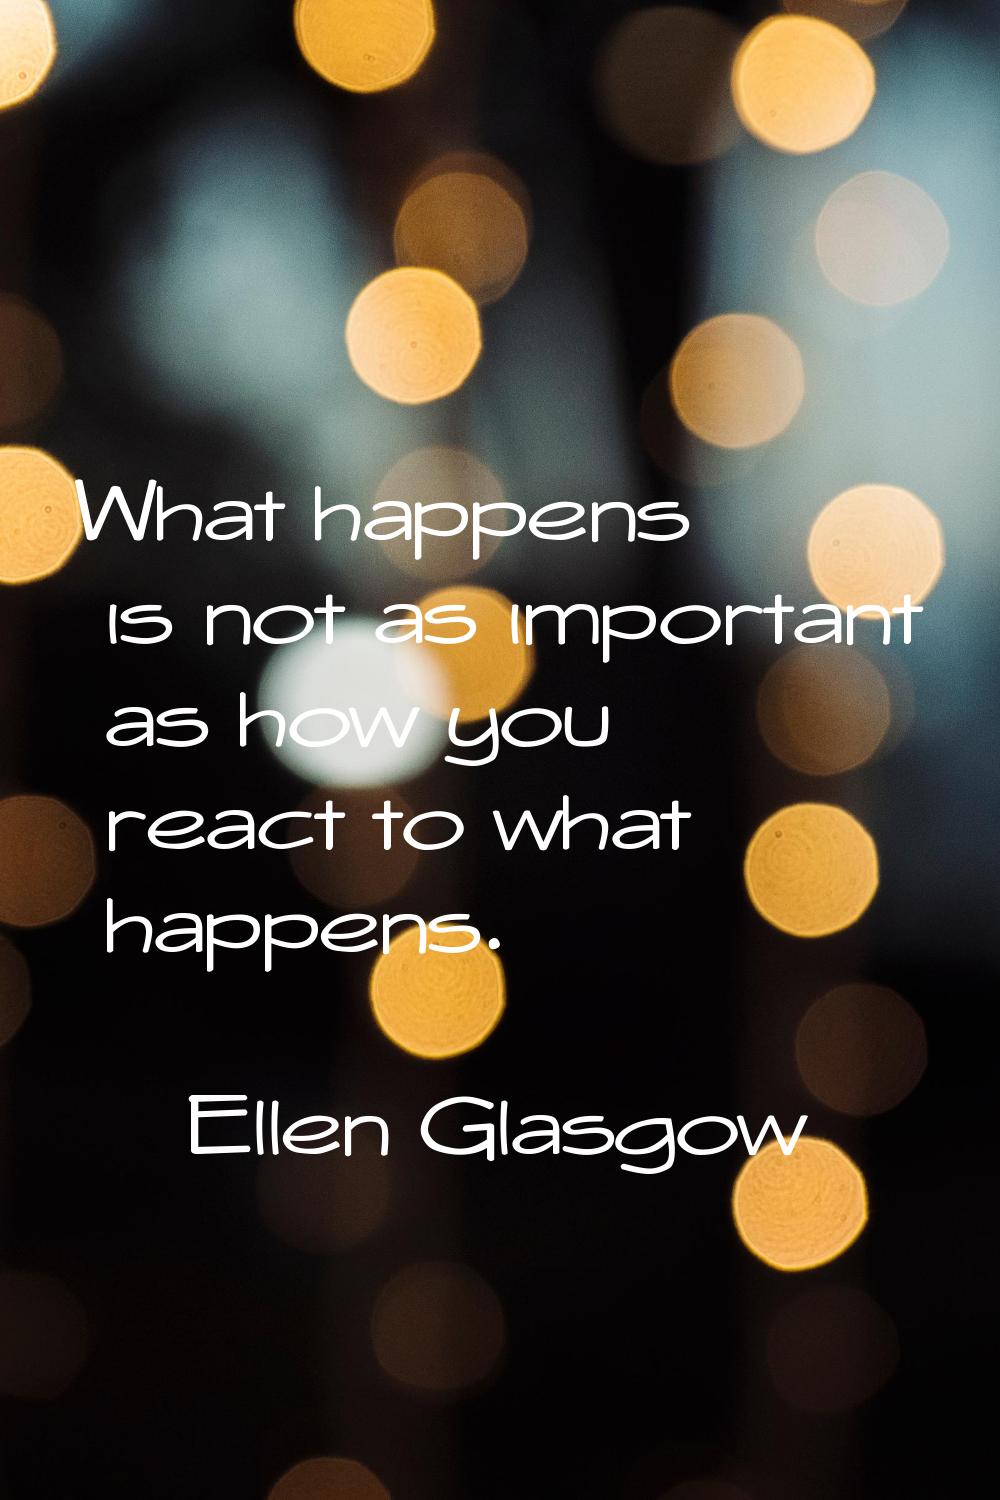 What happens is not as important as how you react to what happens.